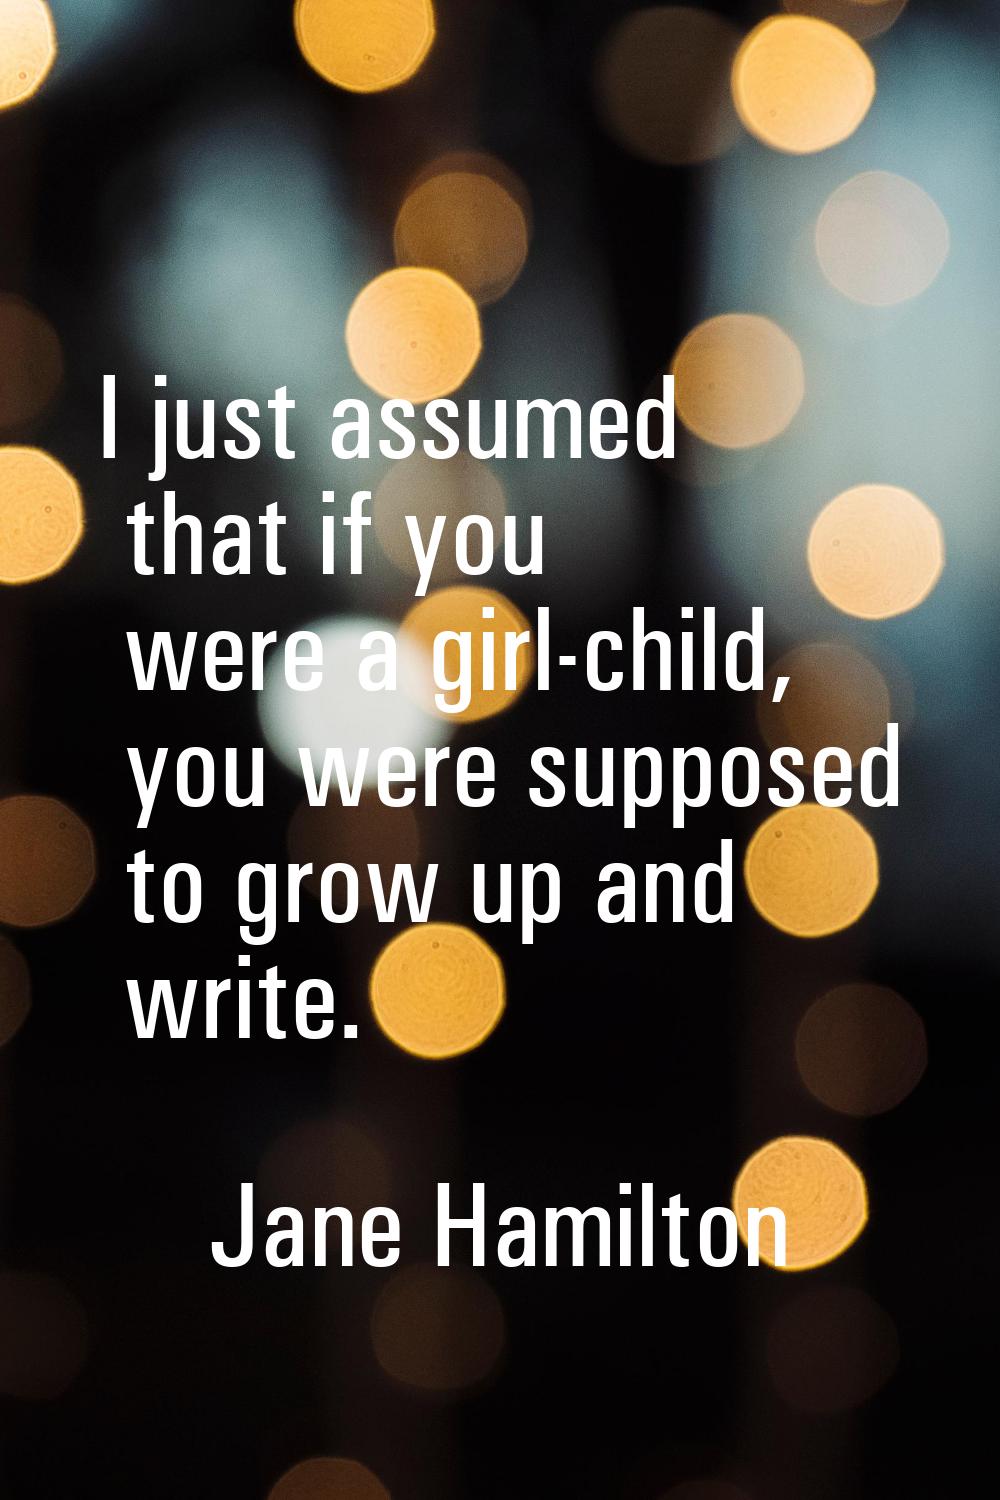 I just assumed that if you were a girl-child, you were supposed to grow up and write.